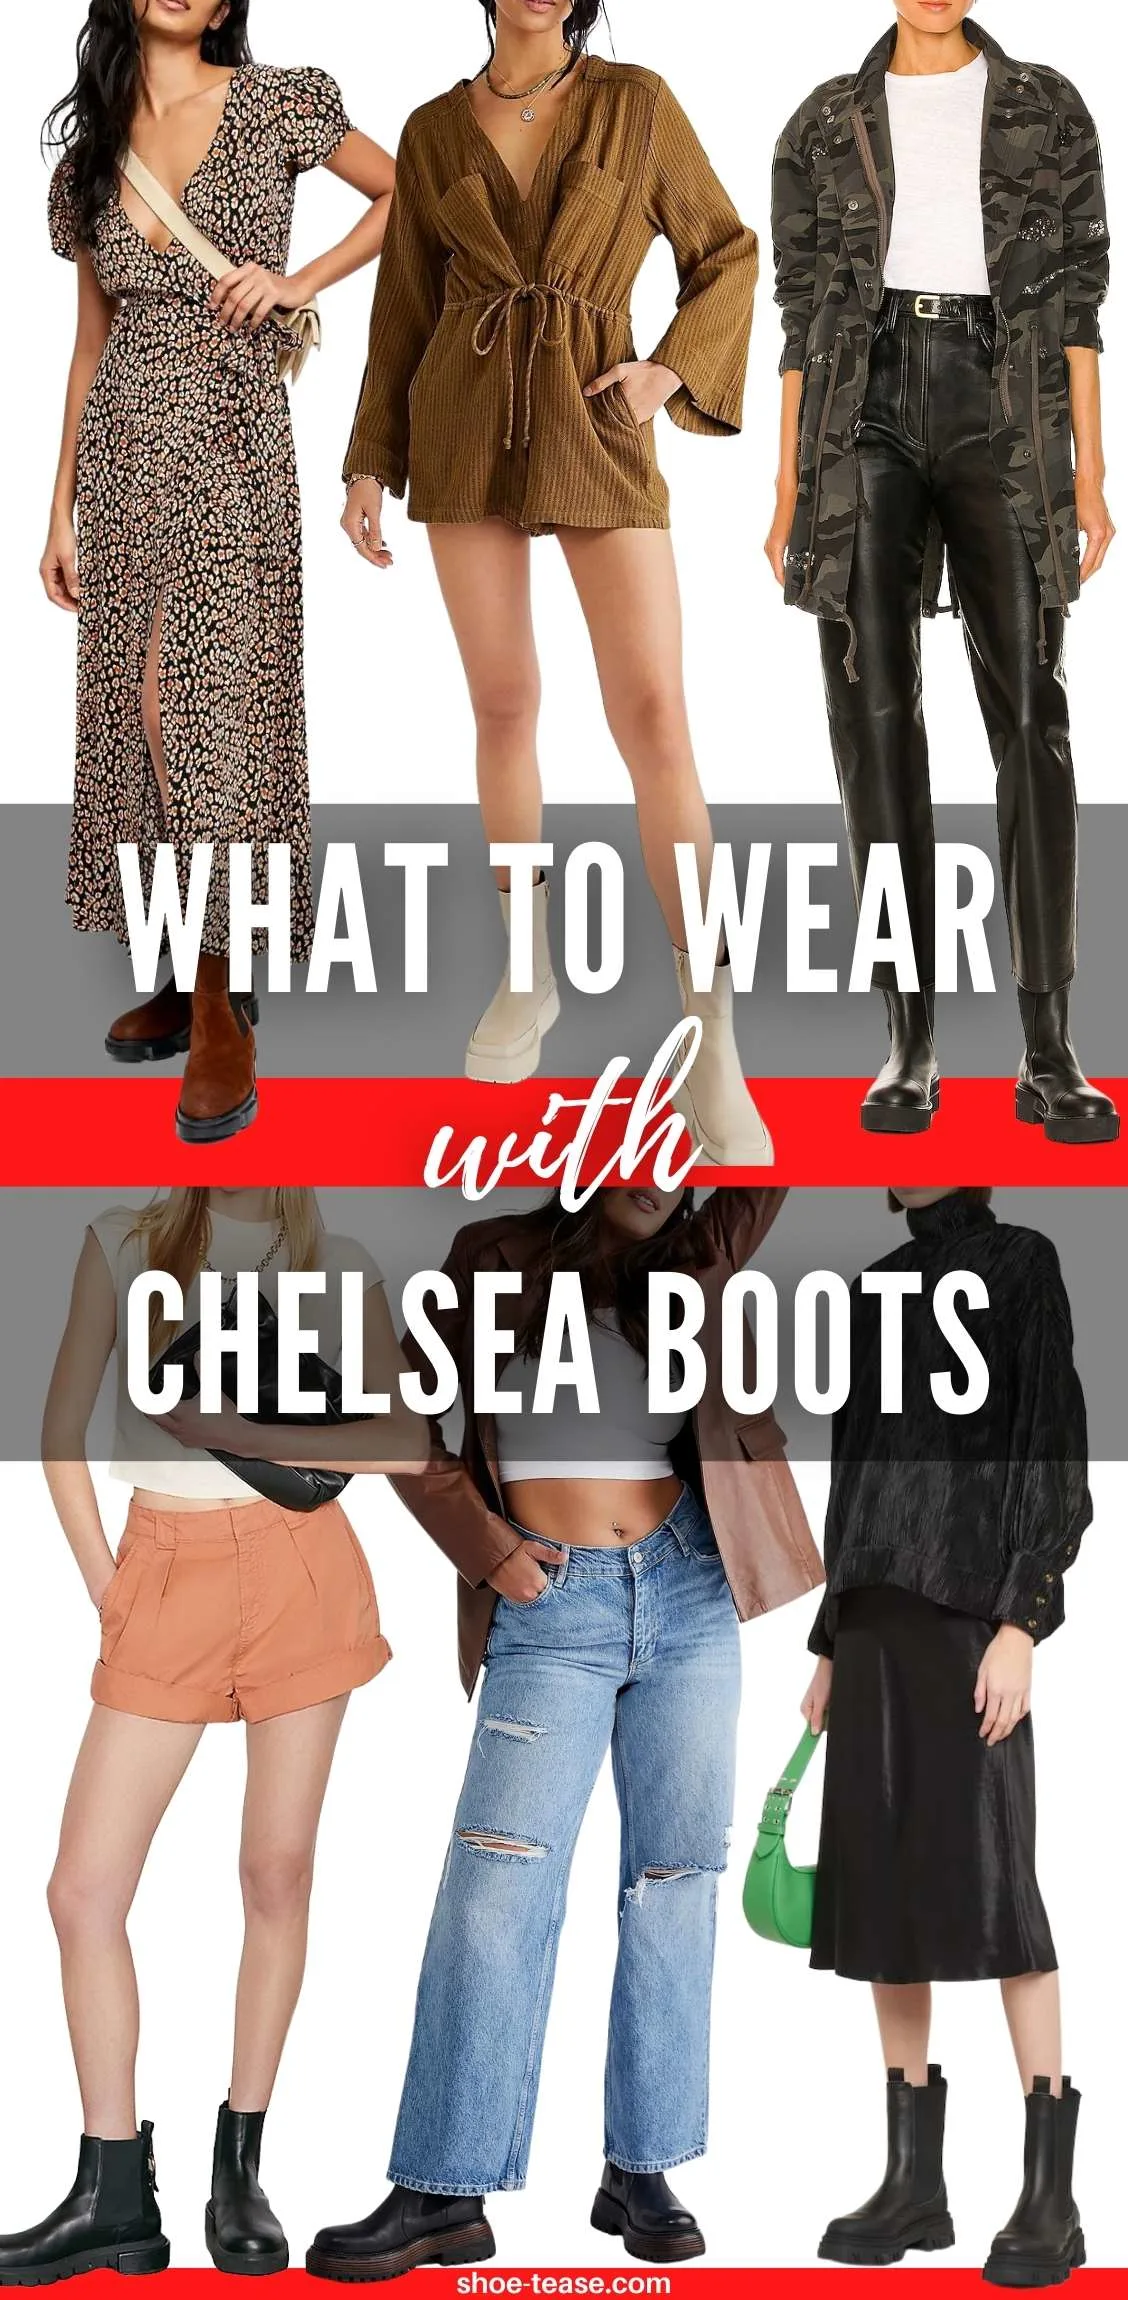 score udskille MP How to Wear Chelsea Boots Outfits for Women - 22 Great Looks!